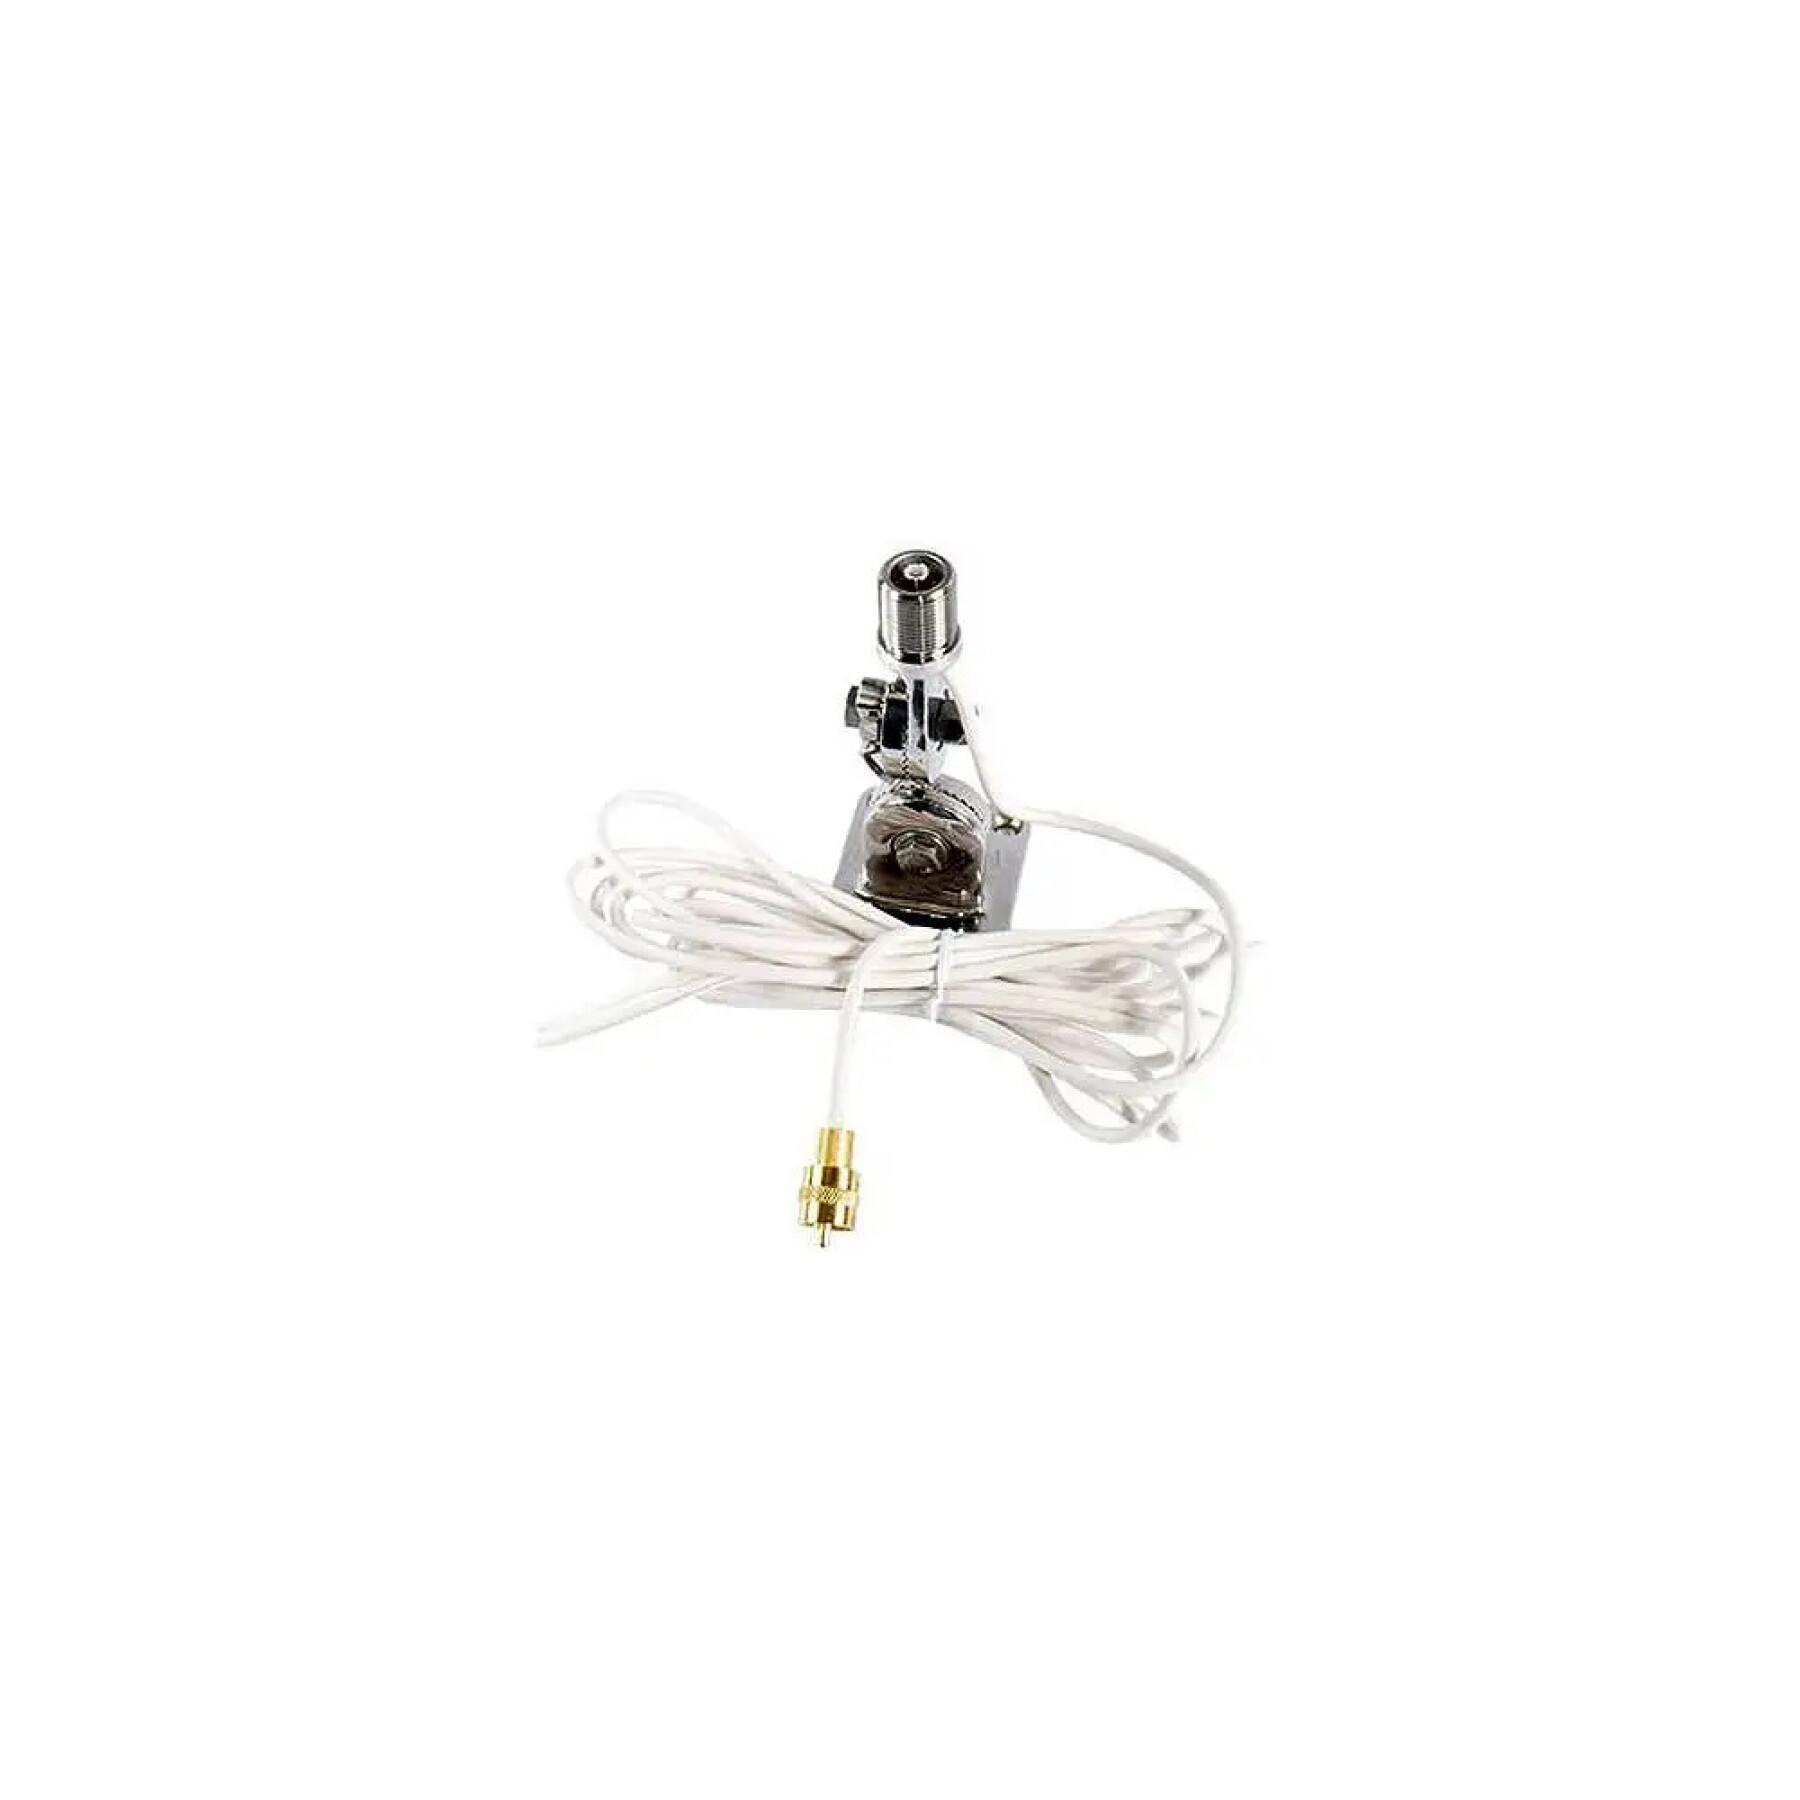 Support articulé inox pour antenne Shakespeare Quick Connect